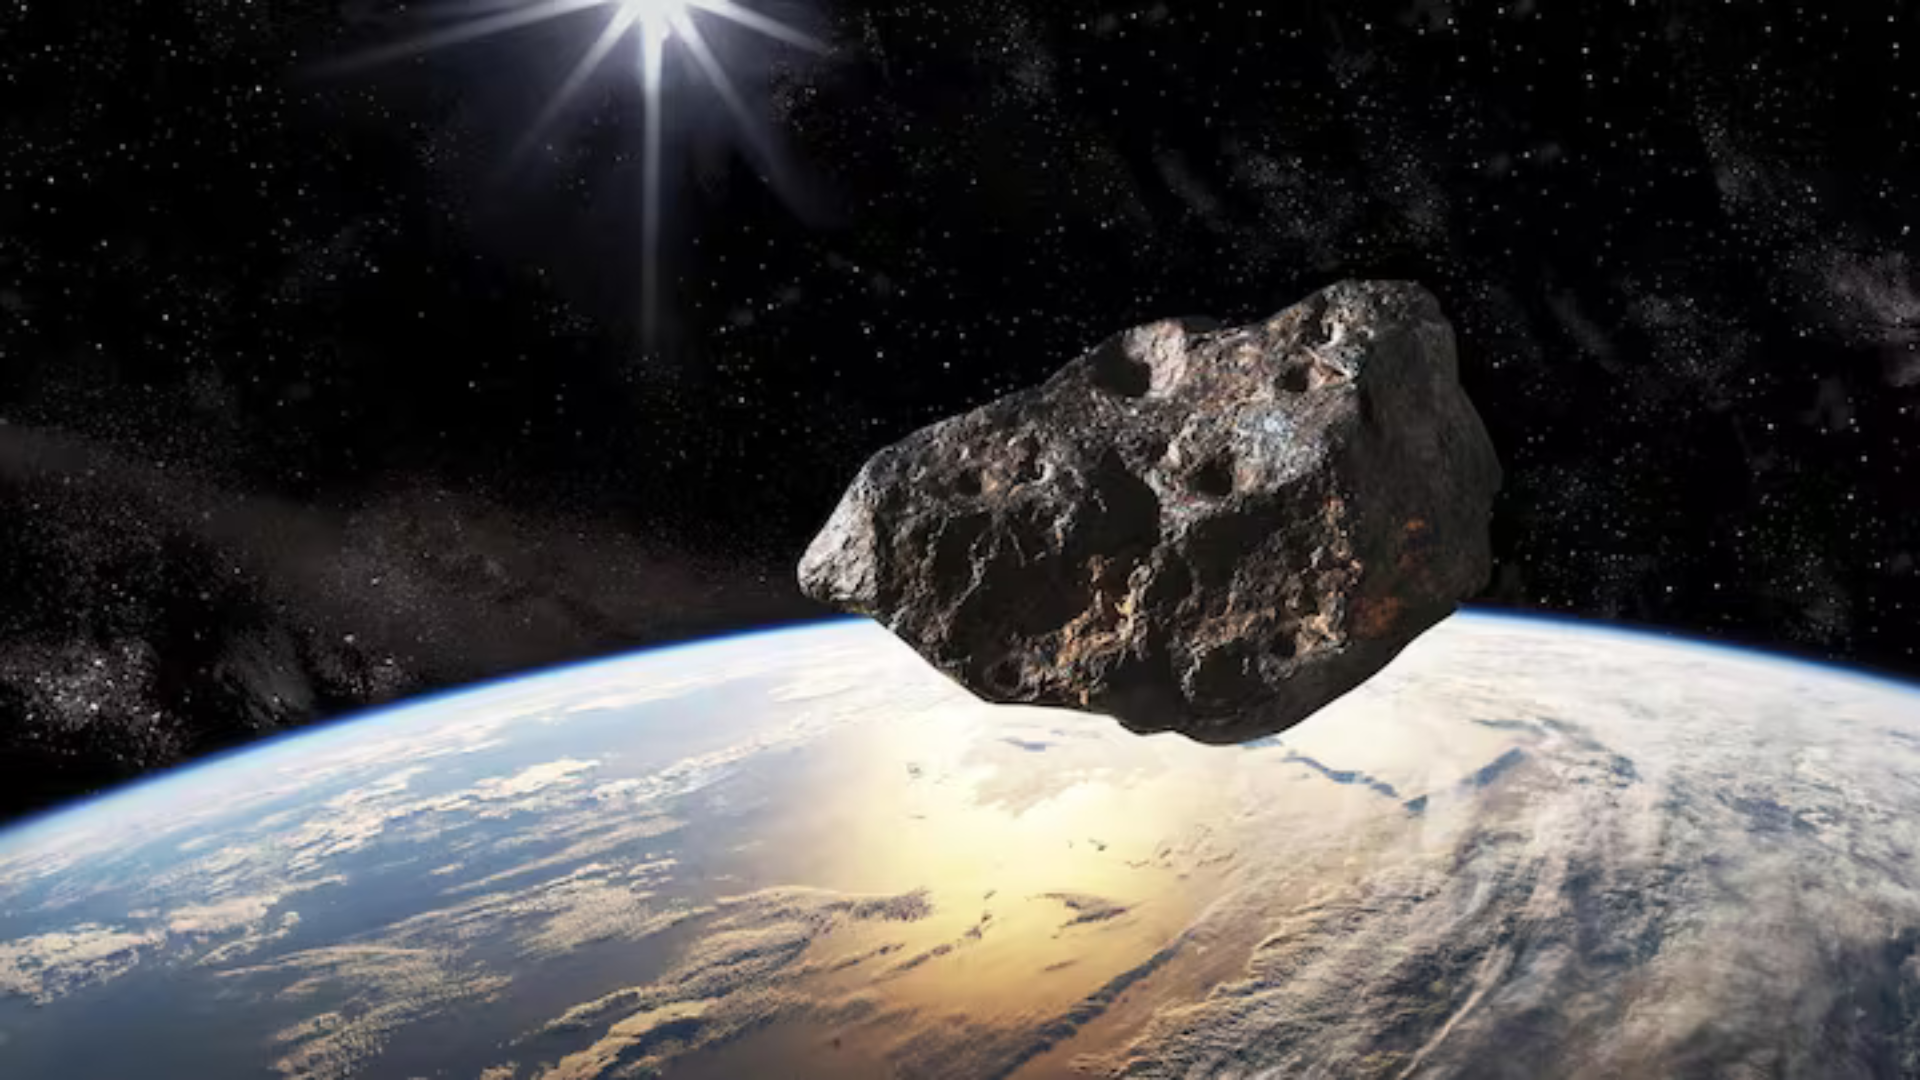 Plane-Sized Asteroid to Make Close Approach to Earth On This Date